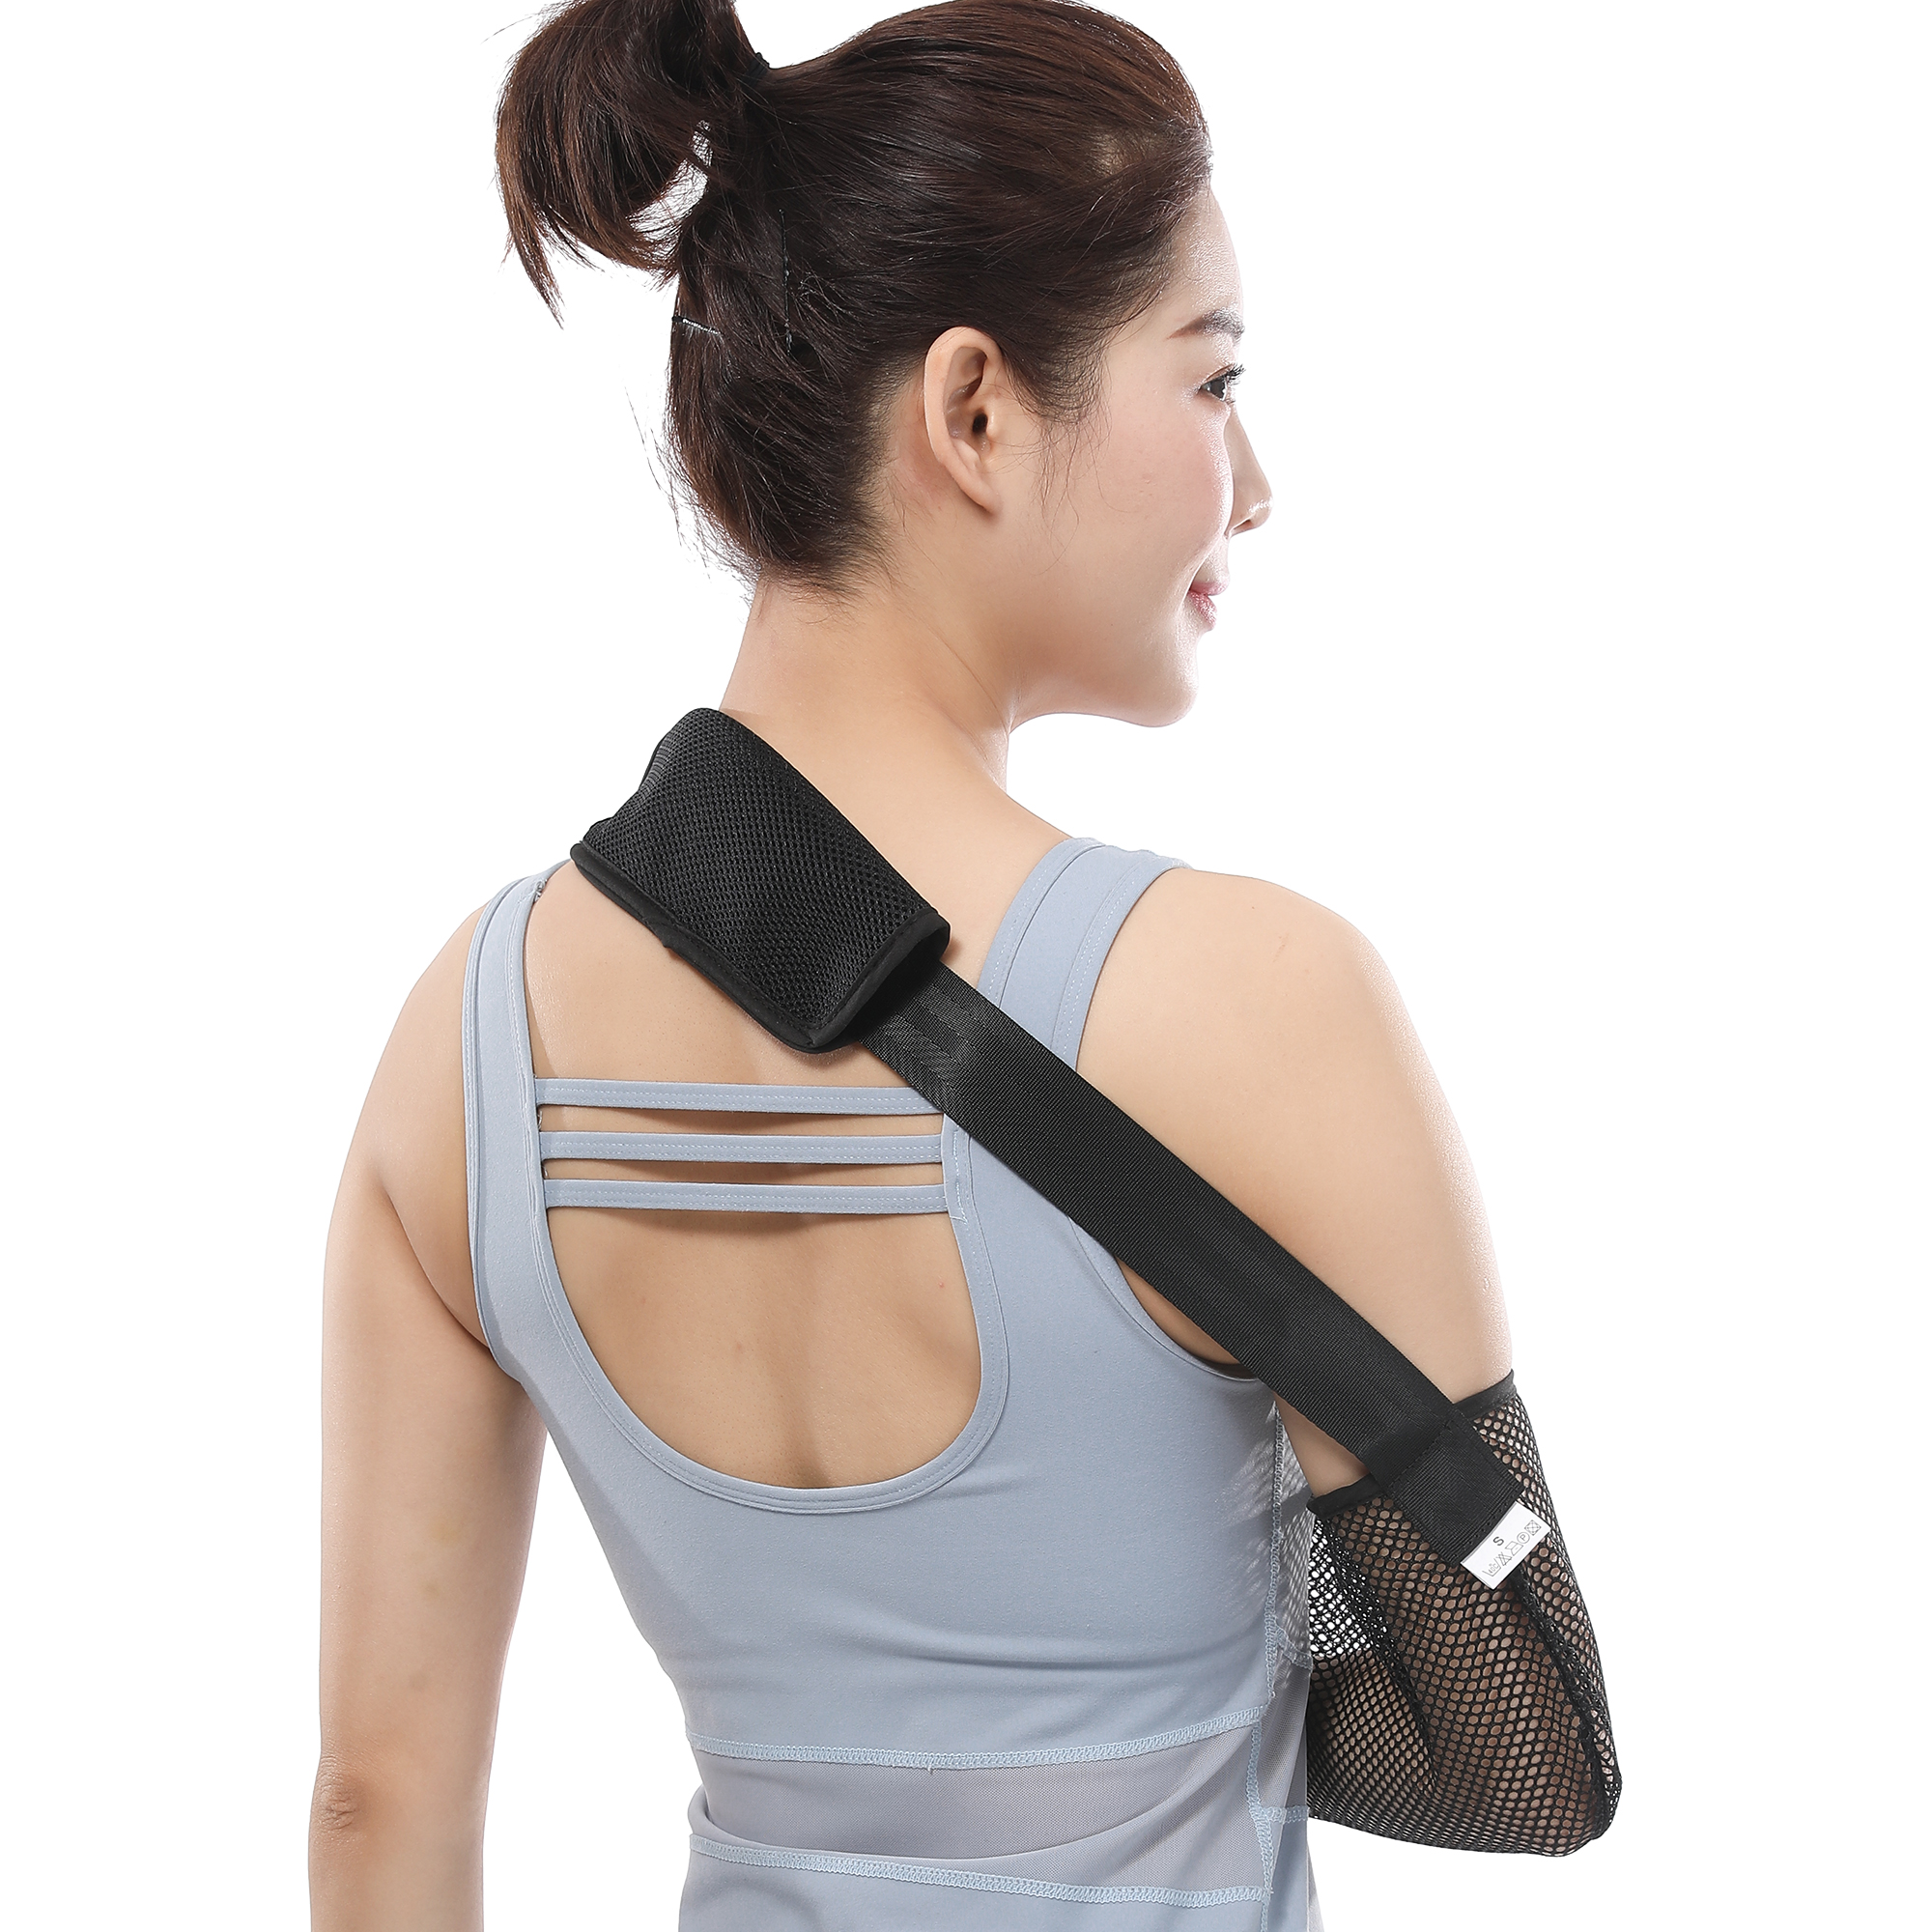 Quit Slouching With the Help of a Posture Corrector for $17